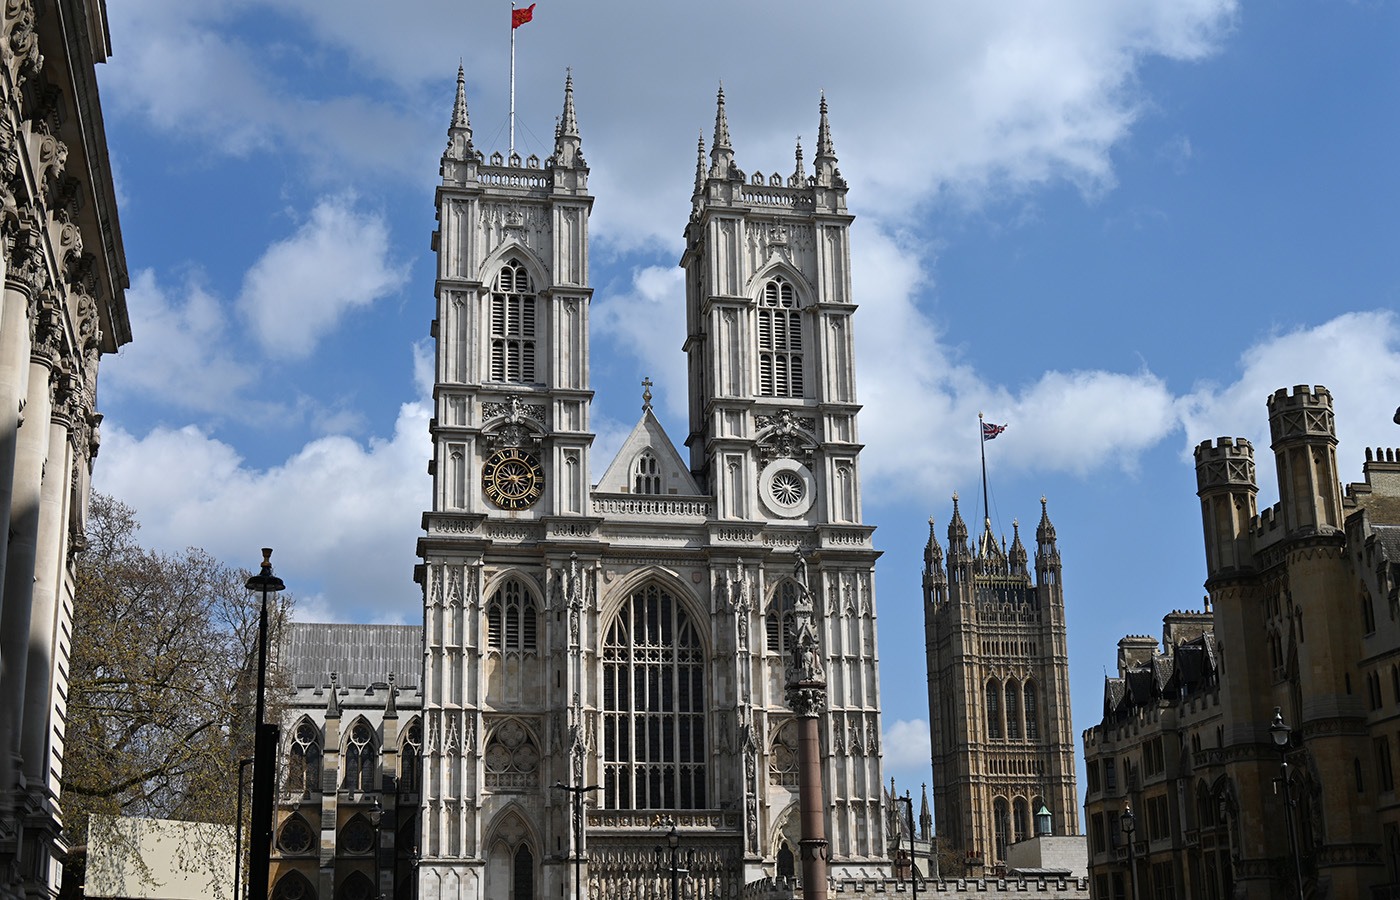 The coronation ceremony will take place at Westminster Abbey in central London.